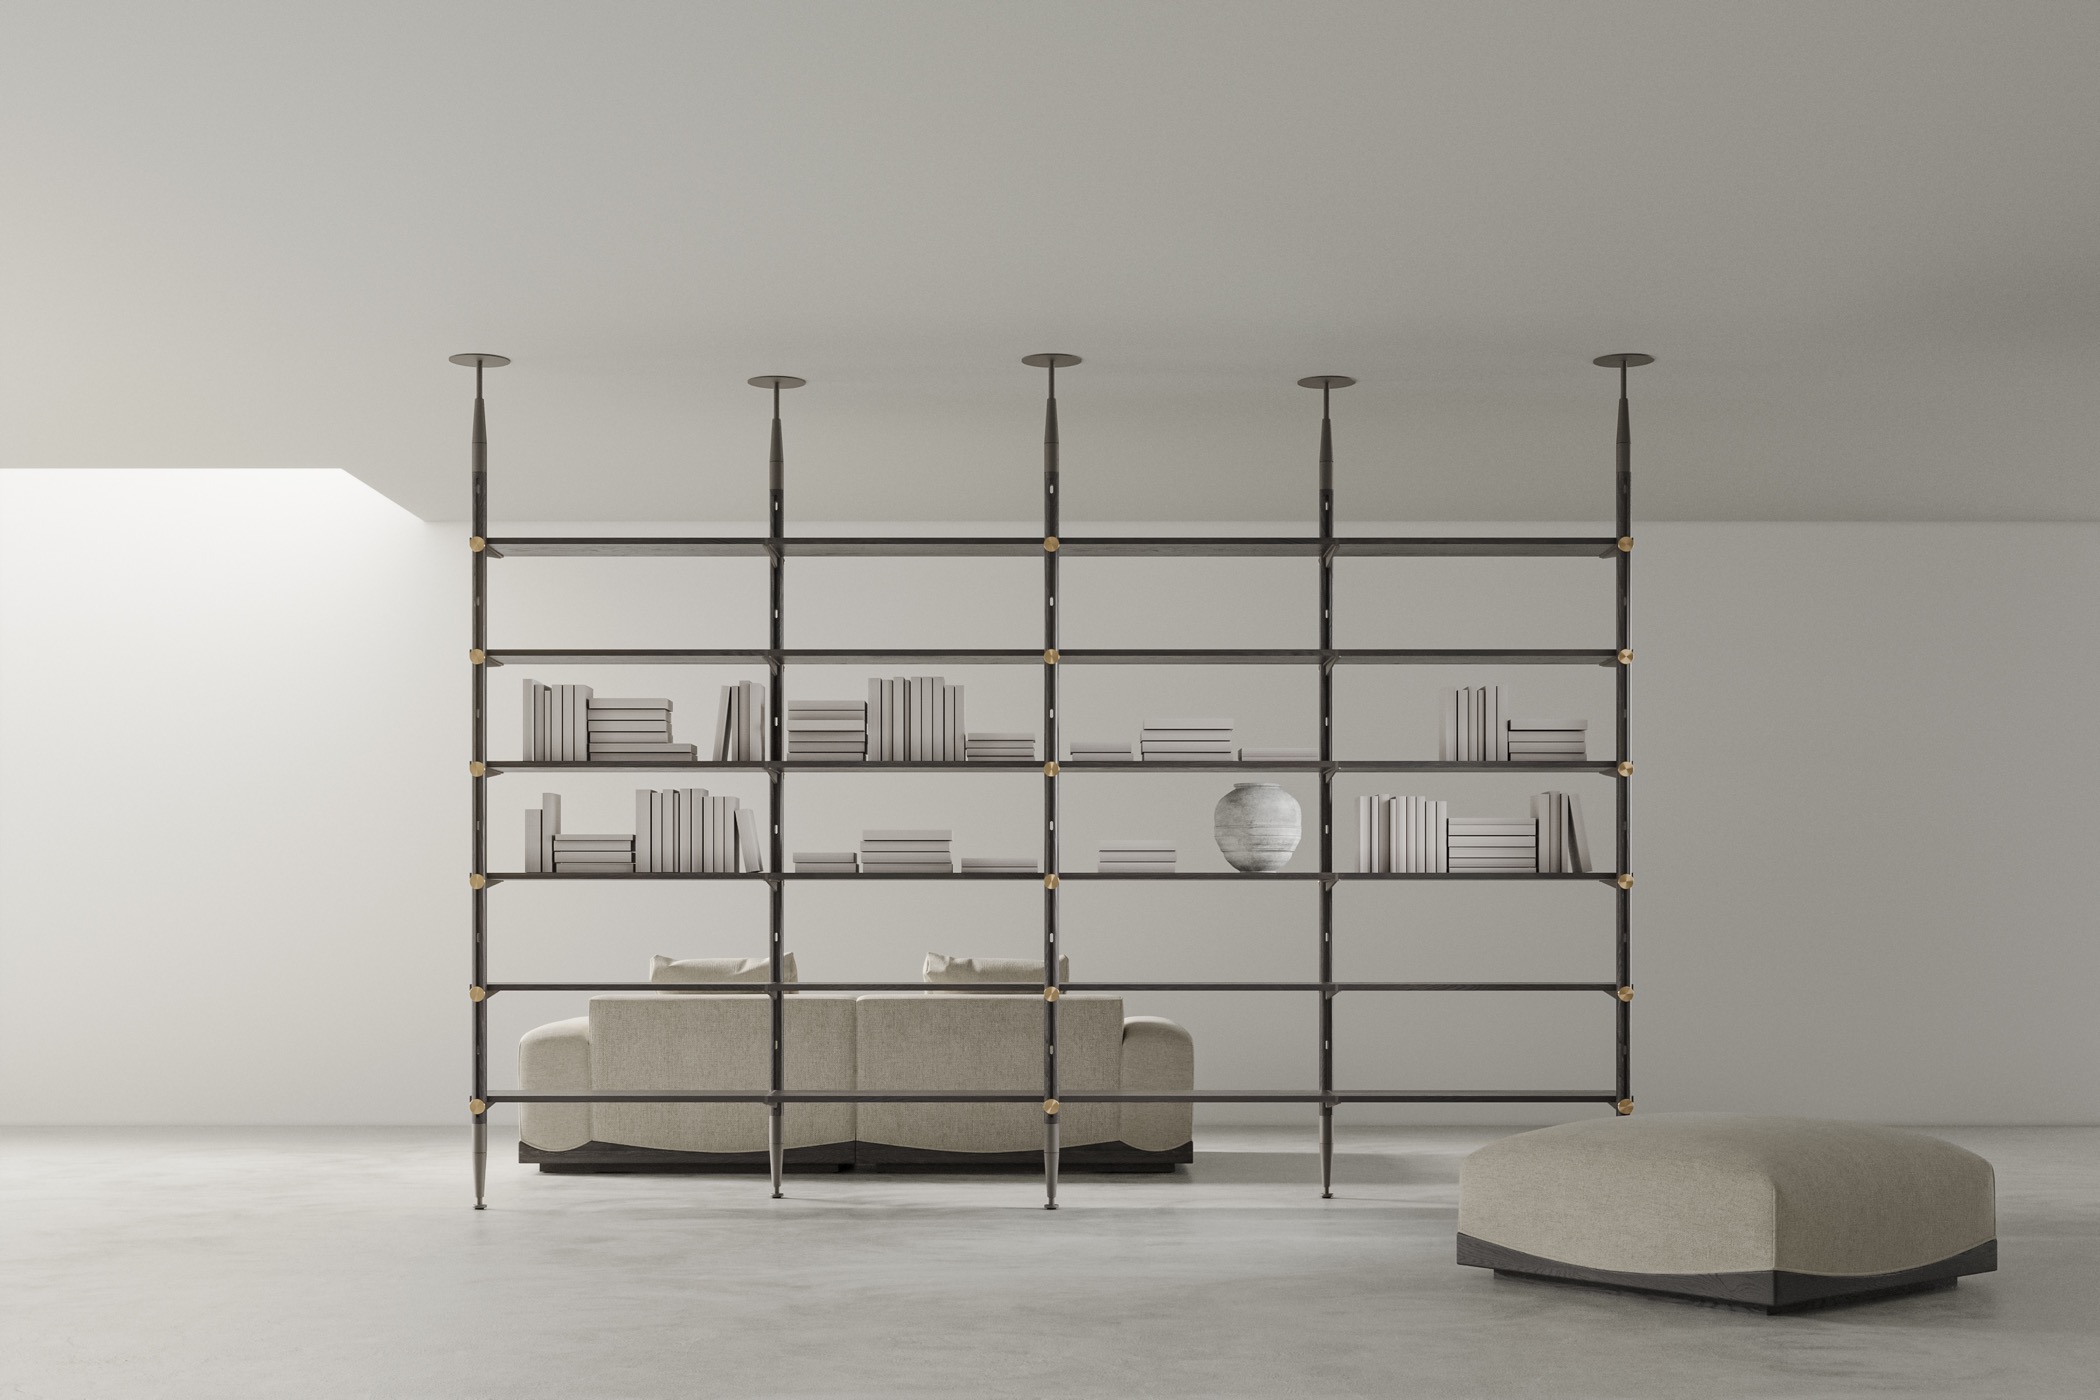 Inumbra Shelving System – Floor to Ceiling